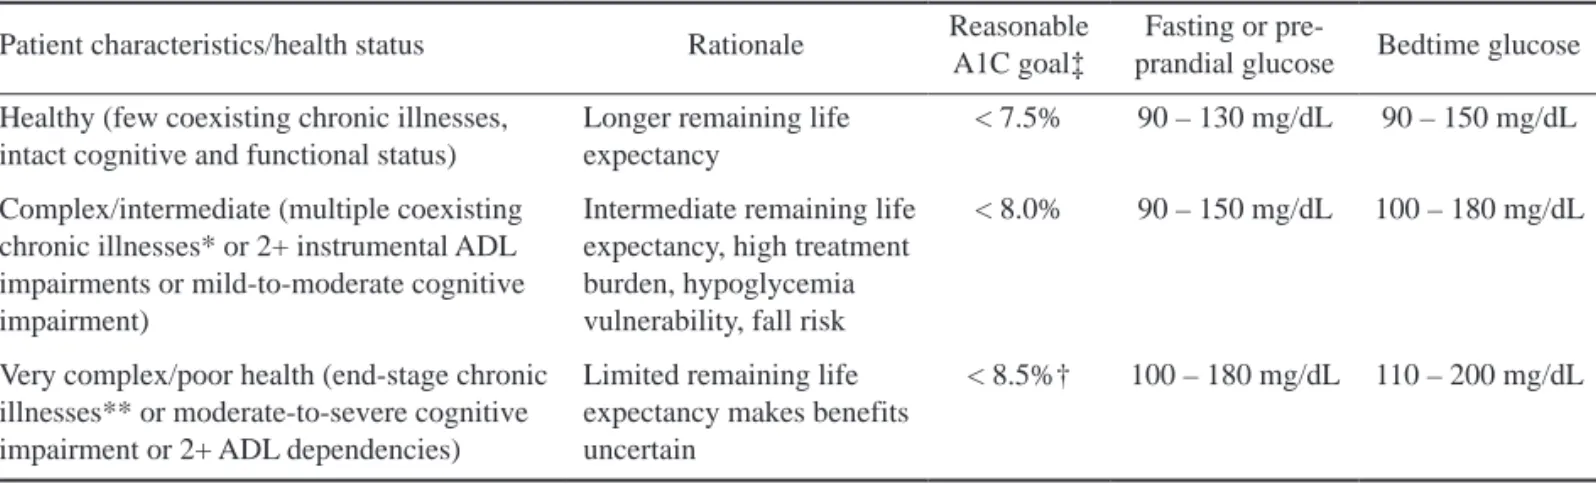 Table 1. A framework for treatment goals for glycemia in older adults with diabetes (adapted from 46, 47)  Patient characteristics/health status Rationale  Reasonable 